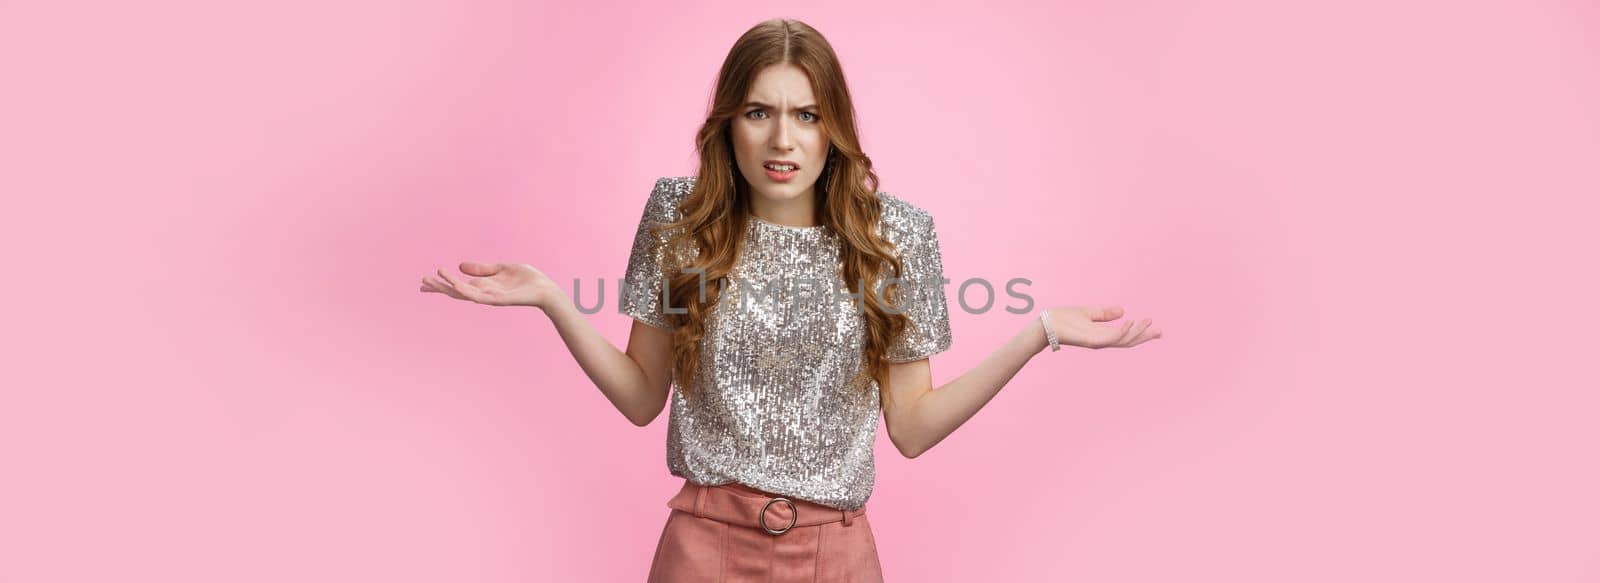 Pissed off annoyed glamour arrogant european woman arguing shrugging cringing displeased bothered spread hands sideways dismay, fighting confused questioned irritated, standing pink background.